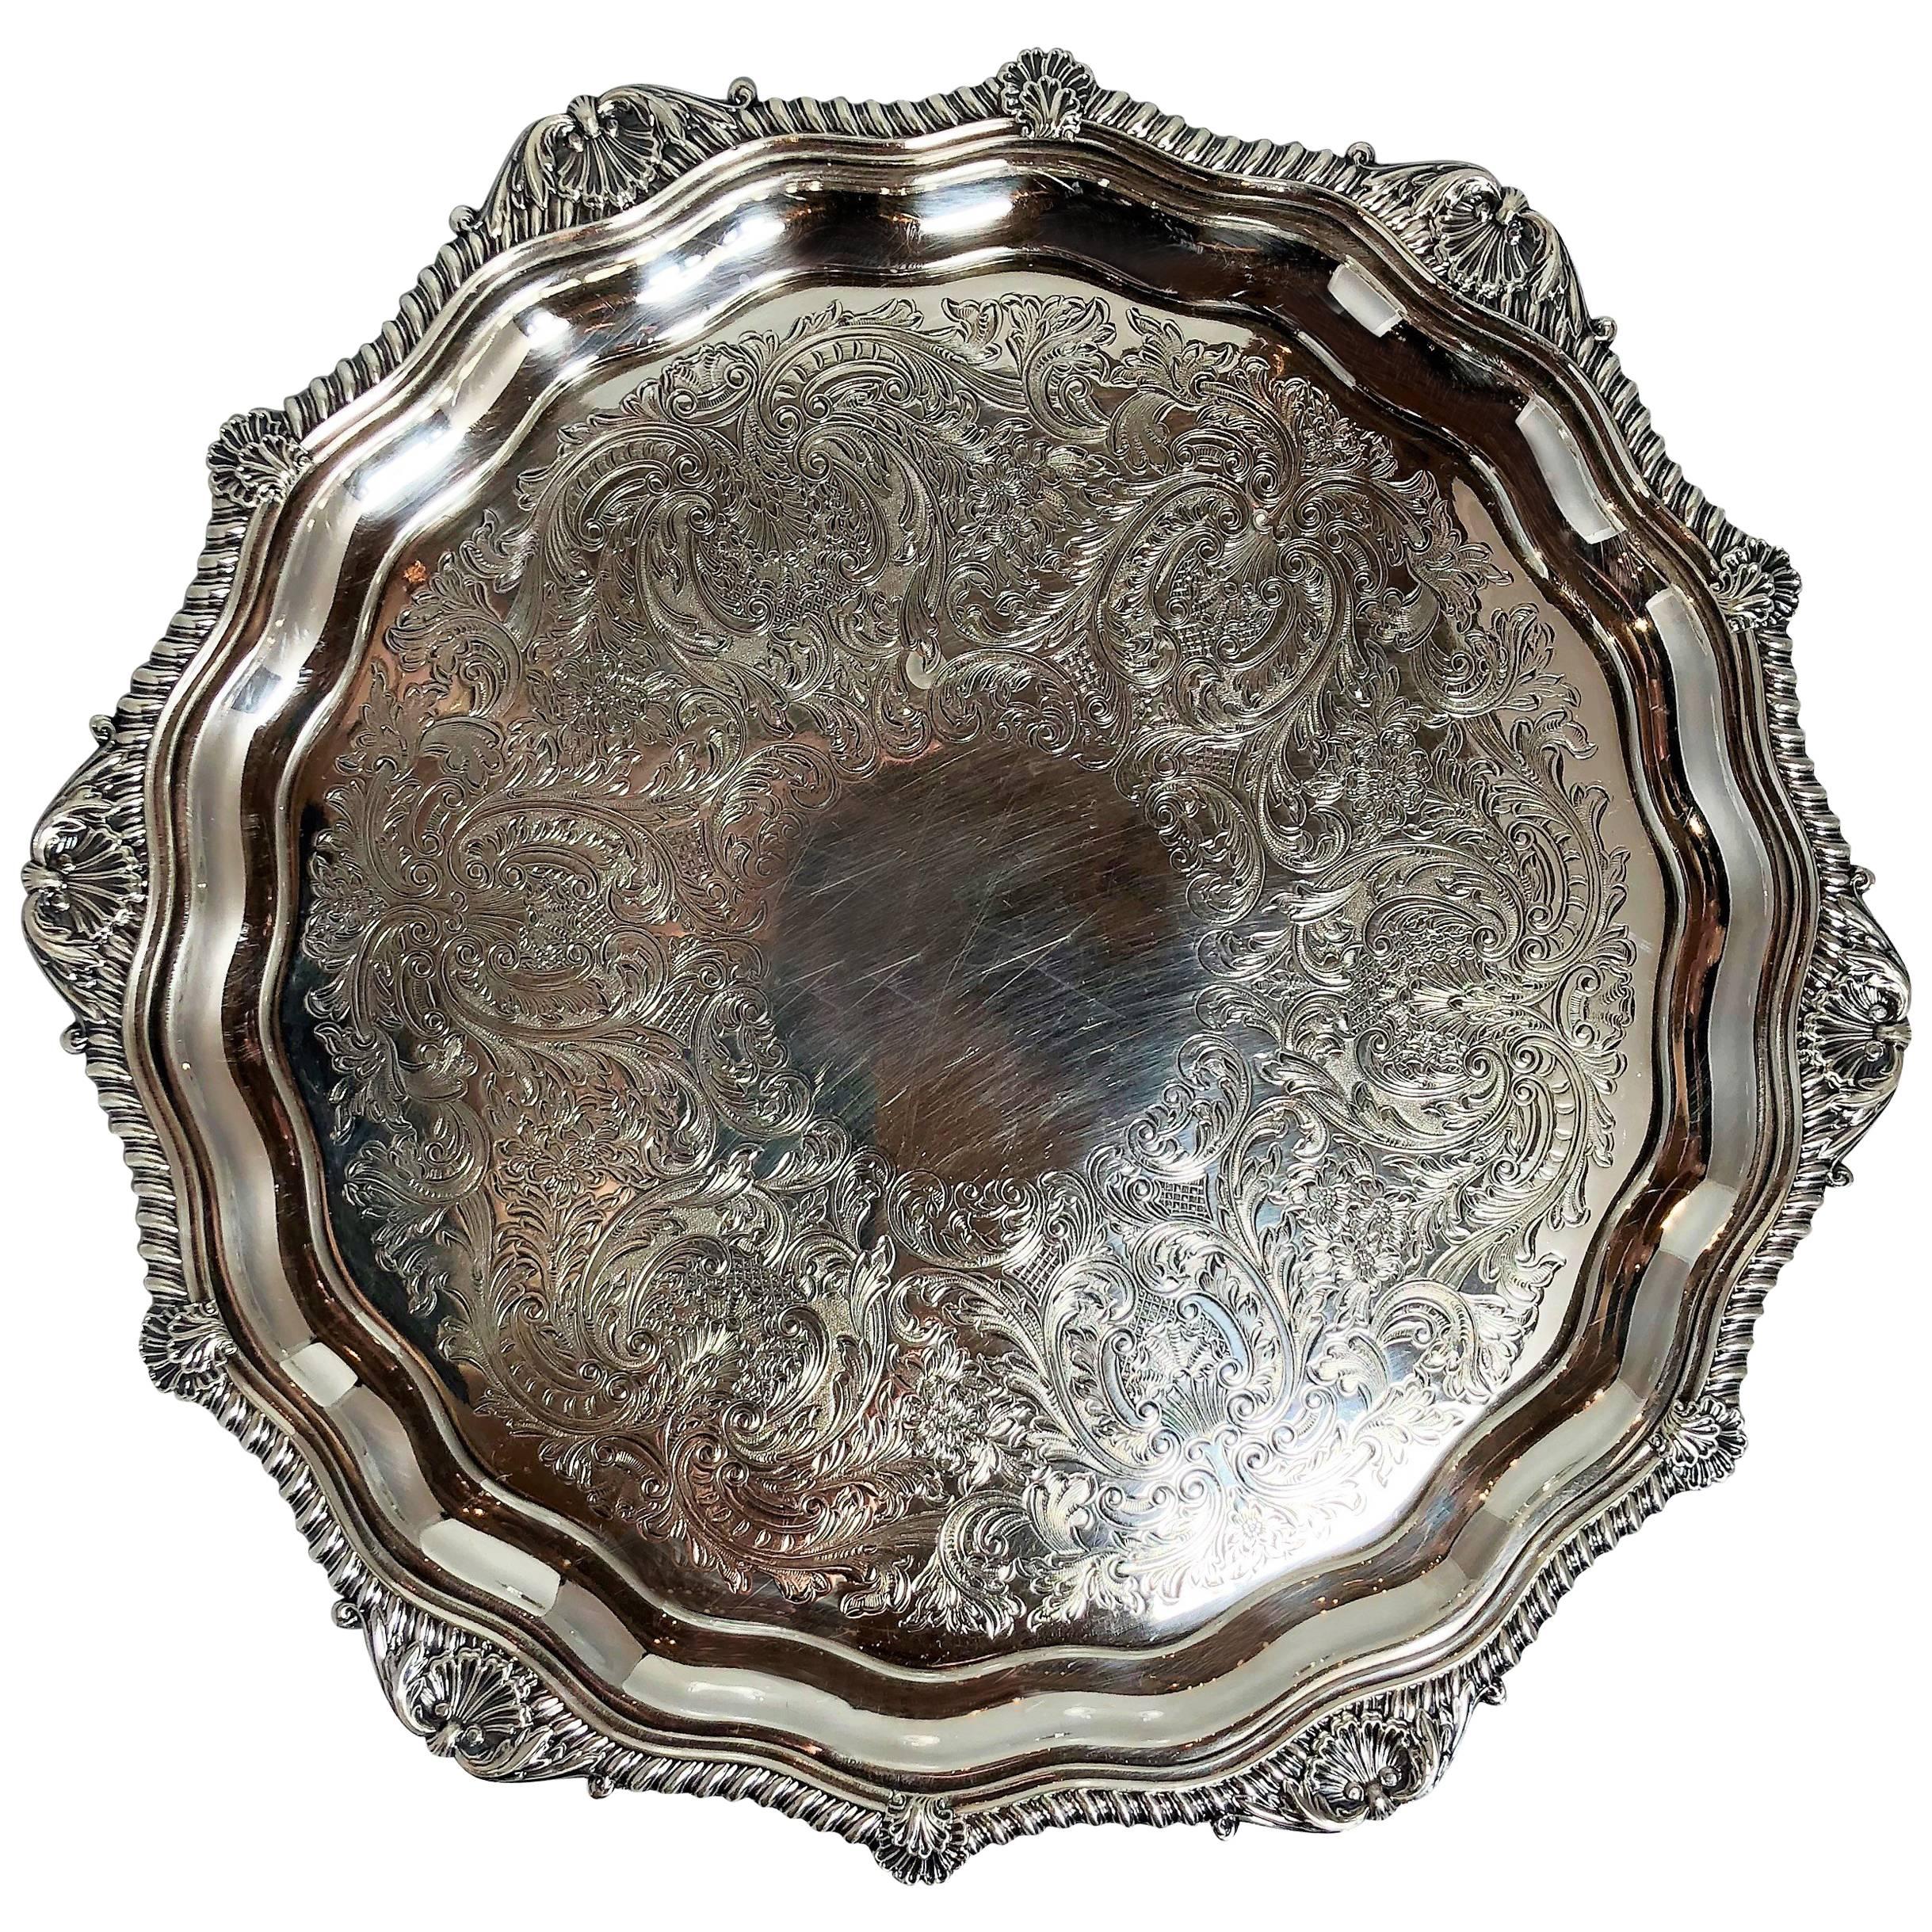 Antique English Silver Tray, Sheffield Silver-Plated Signed Barker Co